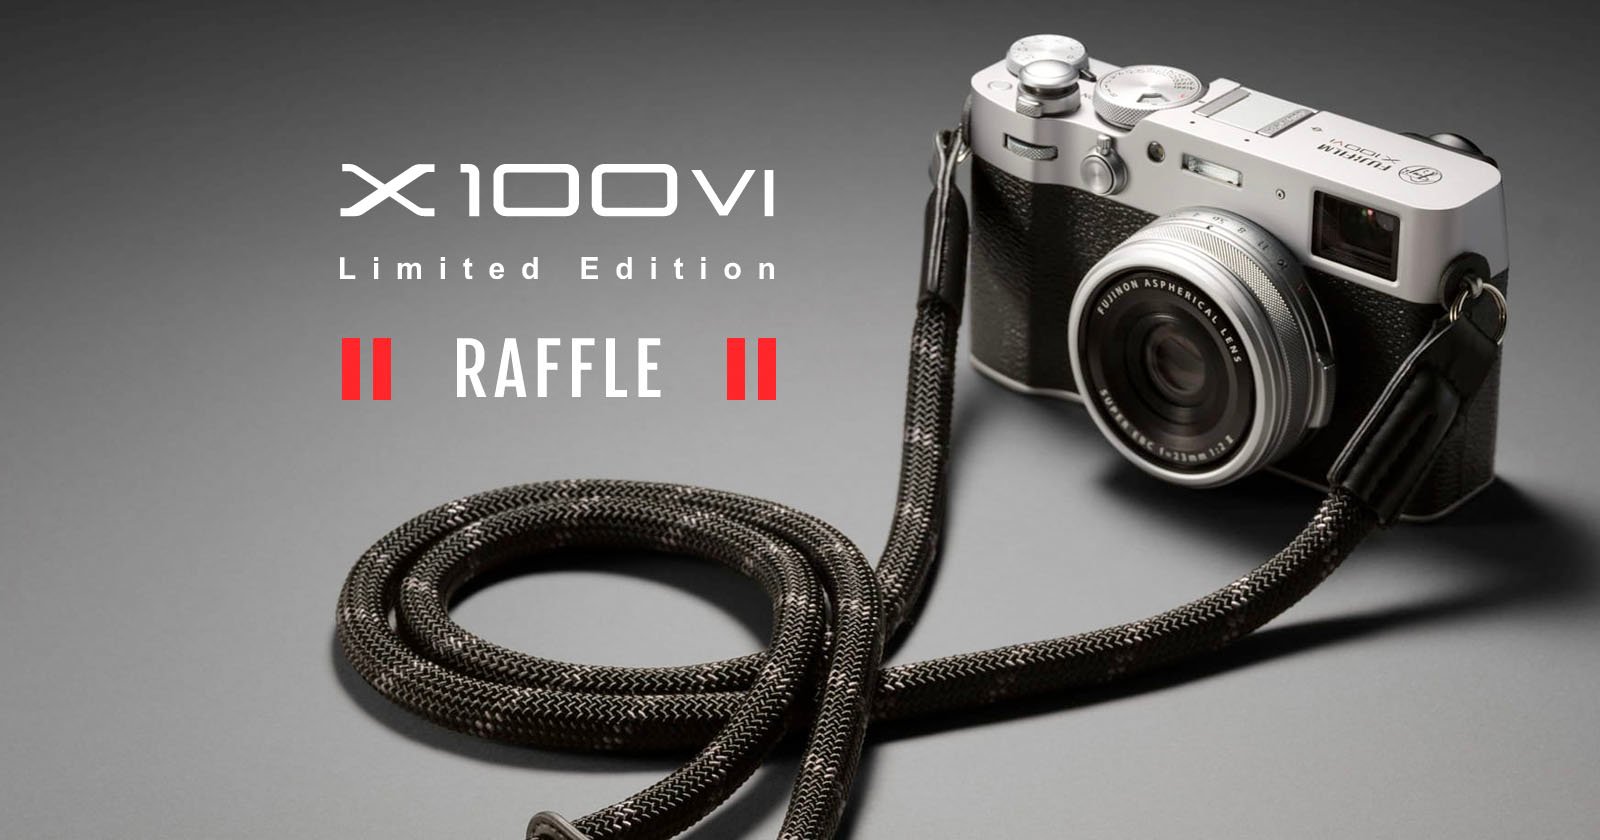 Two-Thirds of the Limited Edition X100VI Sales in the U.S. Were Fraudulent